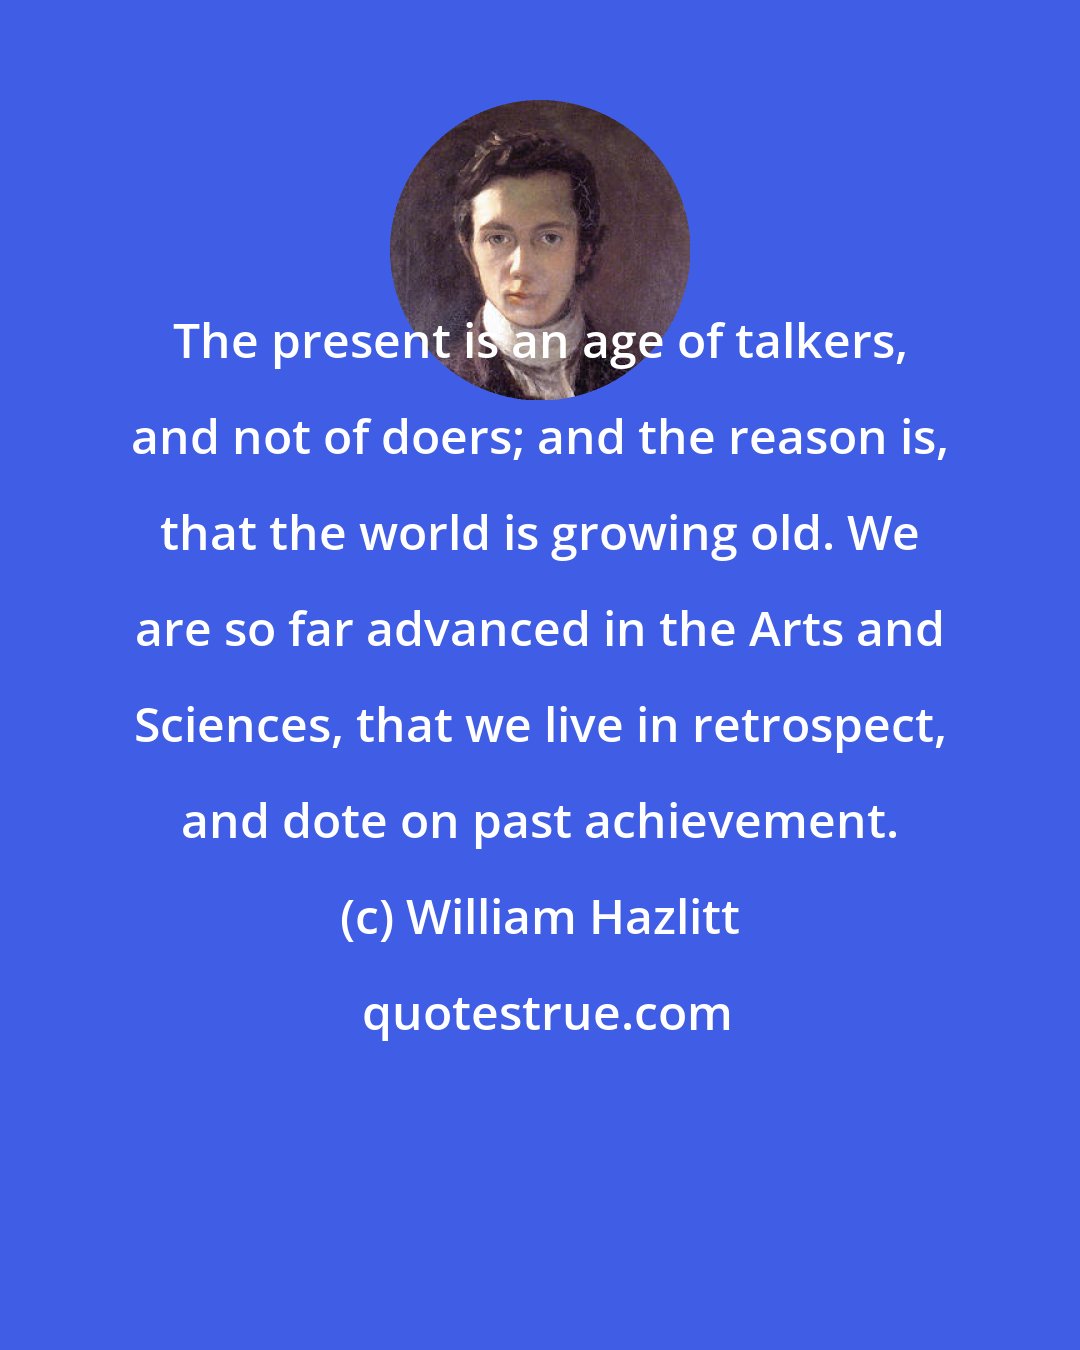 William Hazlitt: The present is an age of talkers, and not of doers; and the reason is, that the world is growing old. We are so far advanced in the Arts and Sciences, that we live in retrospect, and dote on past achievement.